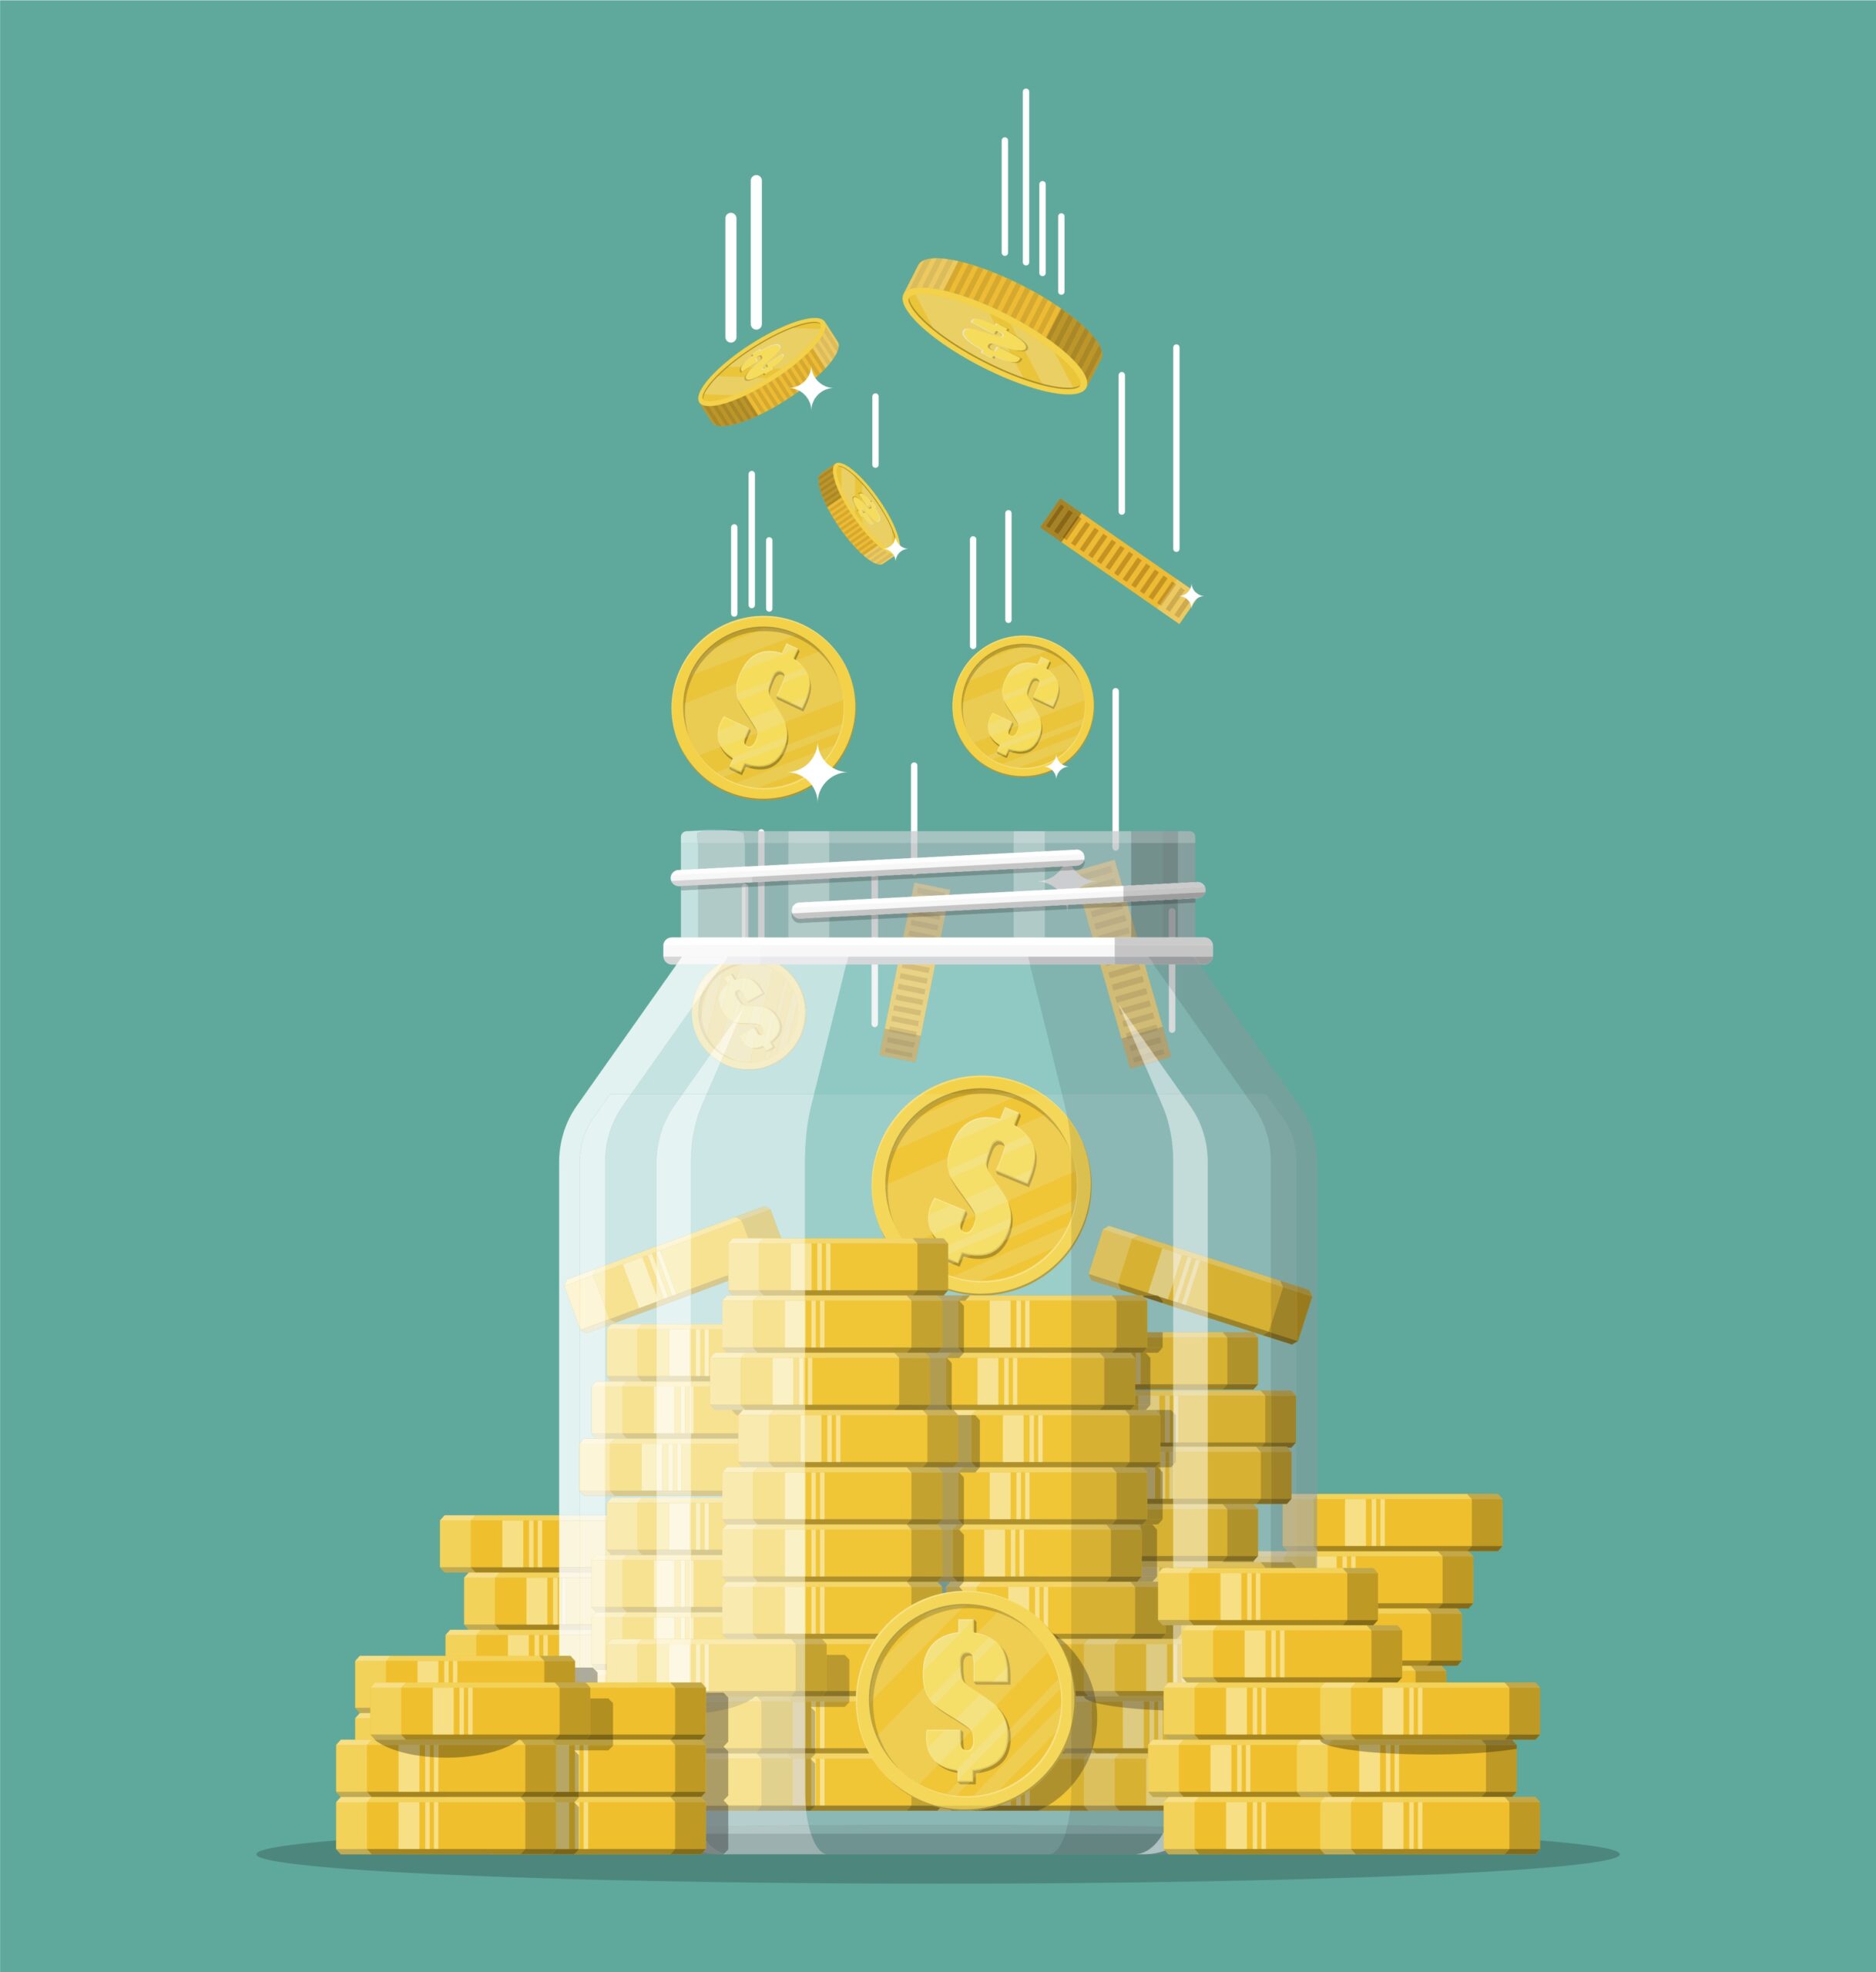 Illustration of a clear jar filled with gold coins against a green background.